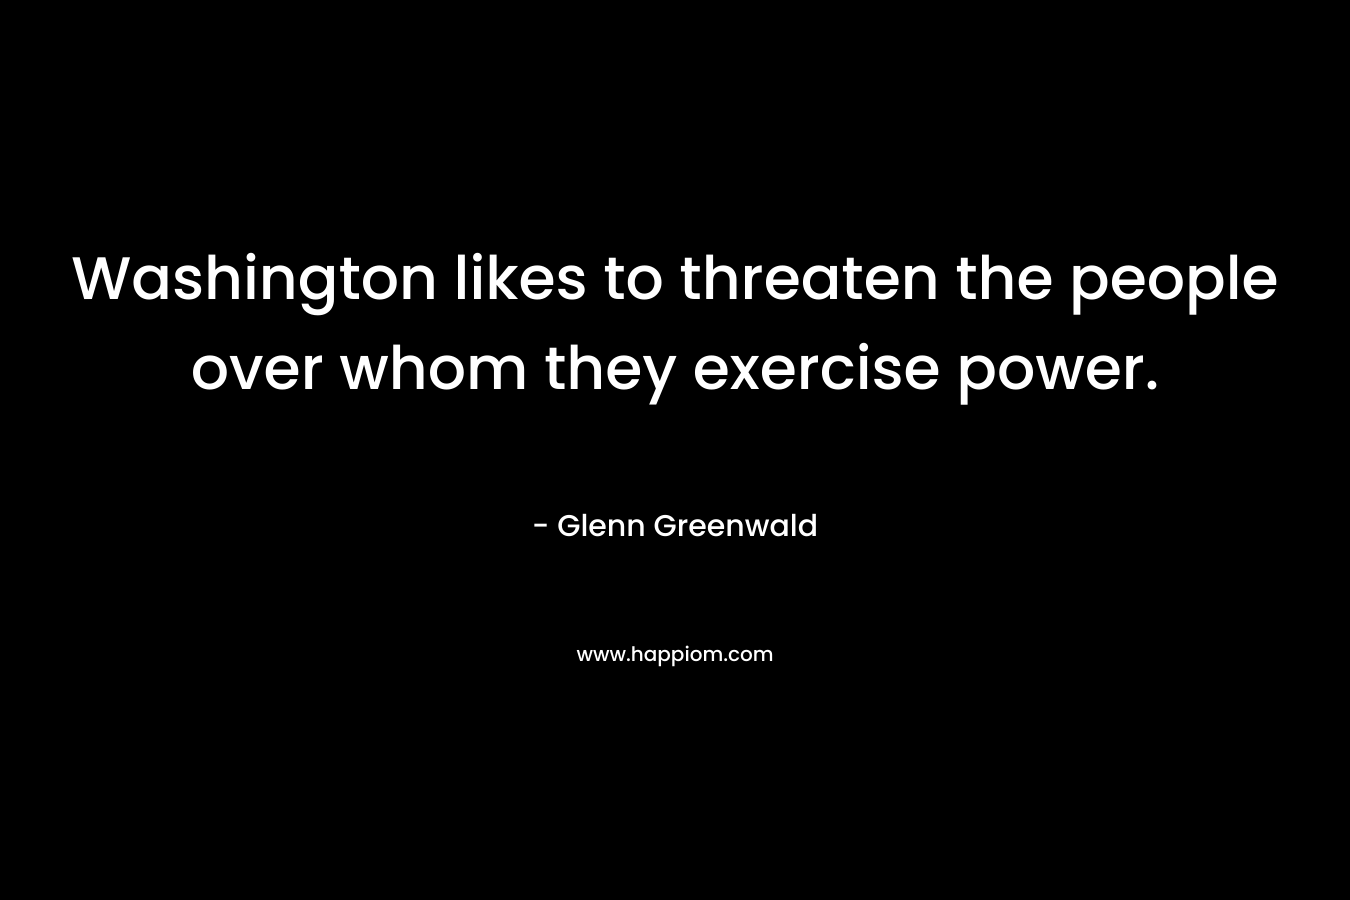 Washington likes to threaten the people over whom they exercise power. – Glenn Greenwald